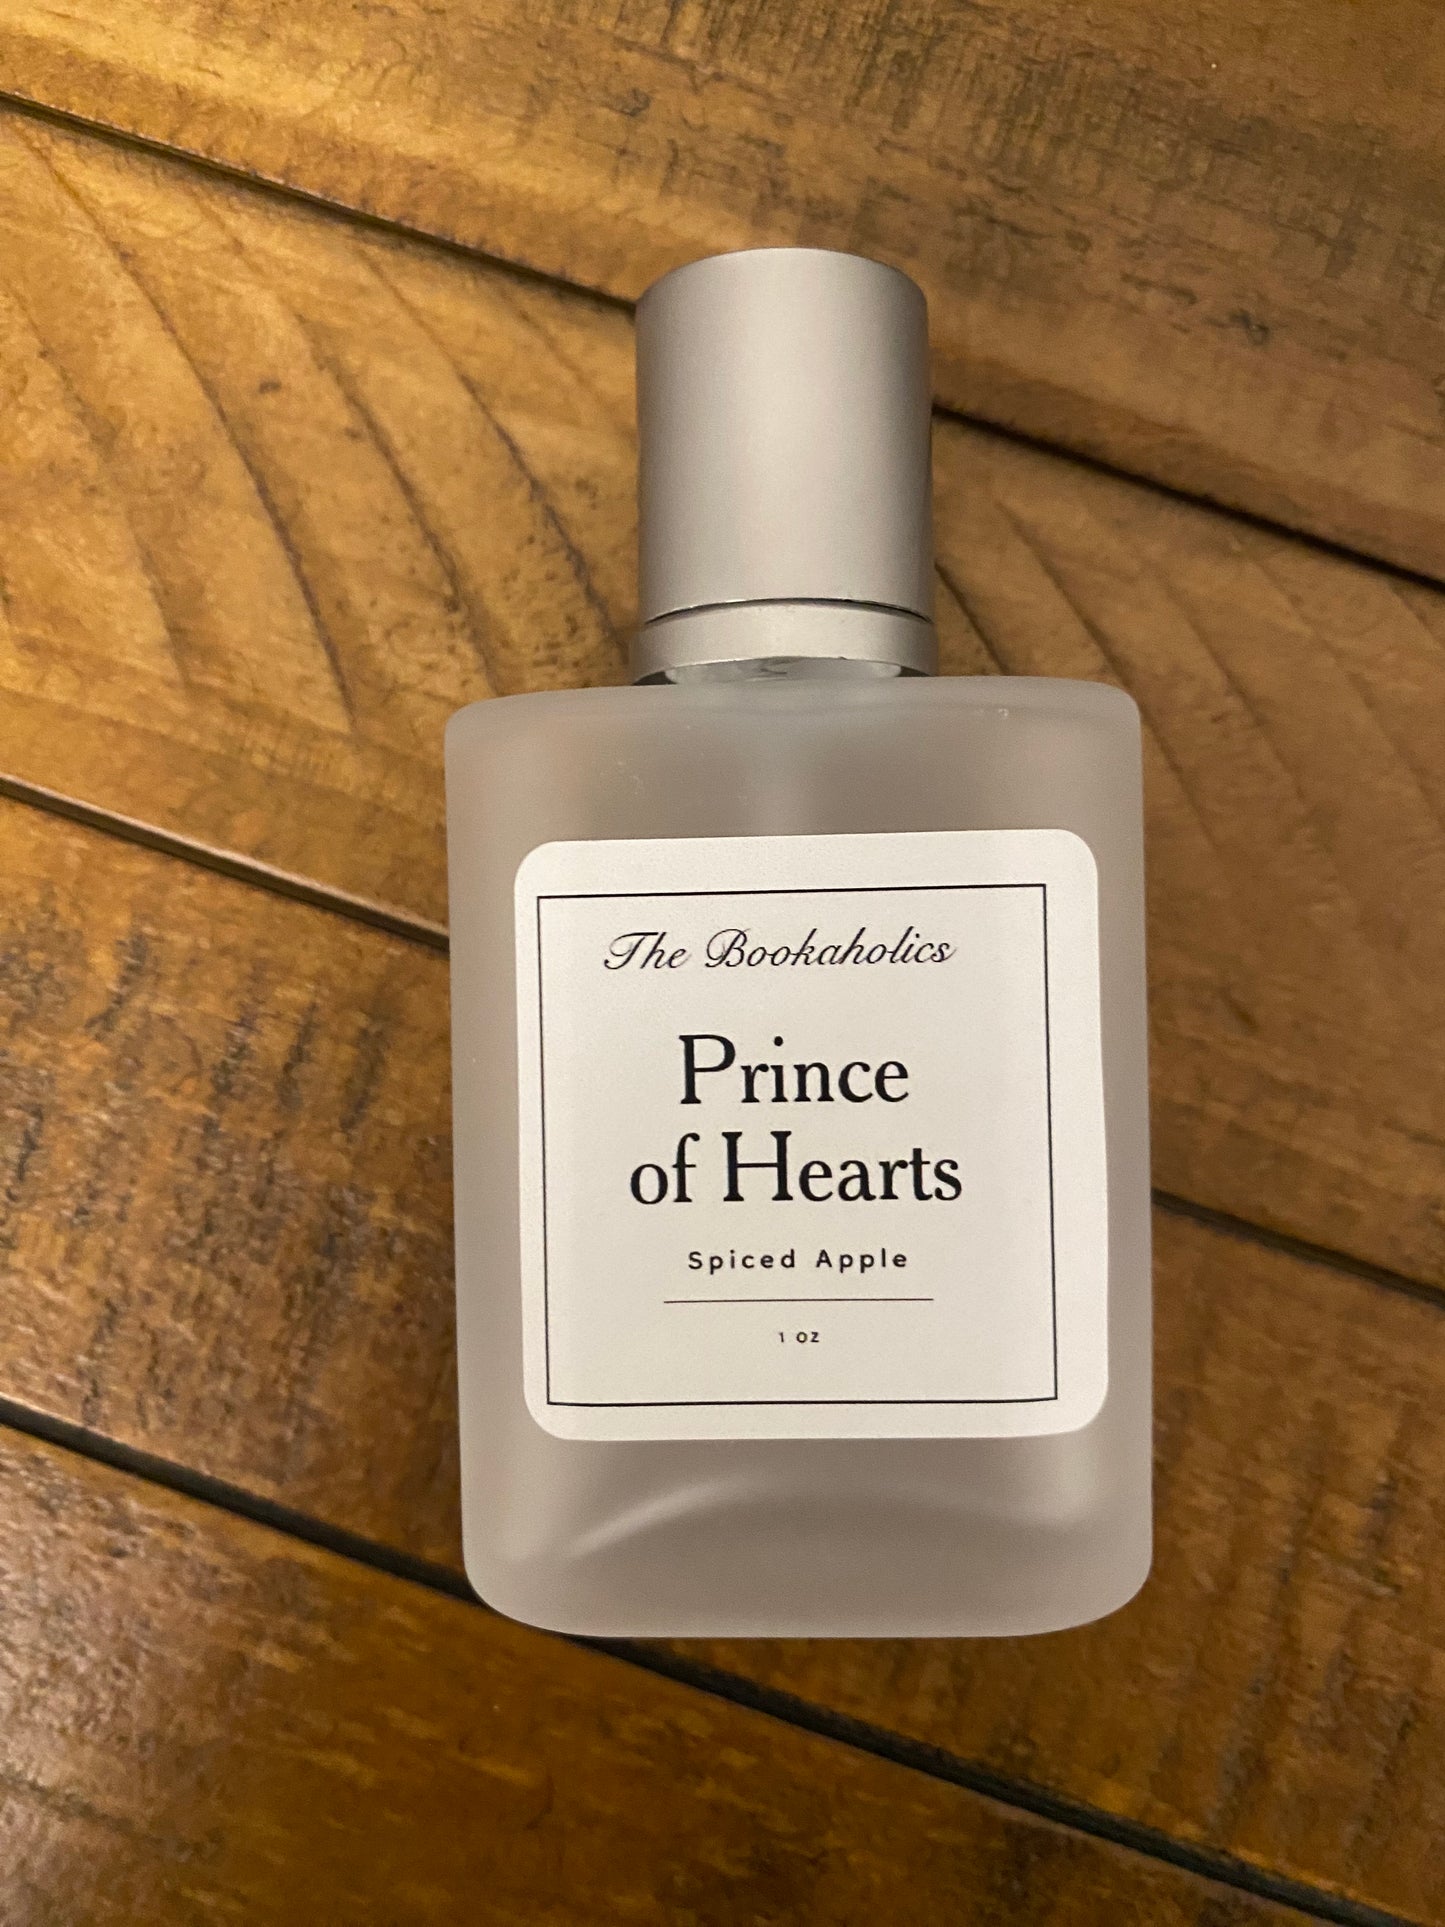 Prince of Hearts: Cologne inspired by Jacks from Caraval and Once Upon a Broken Heart